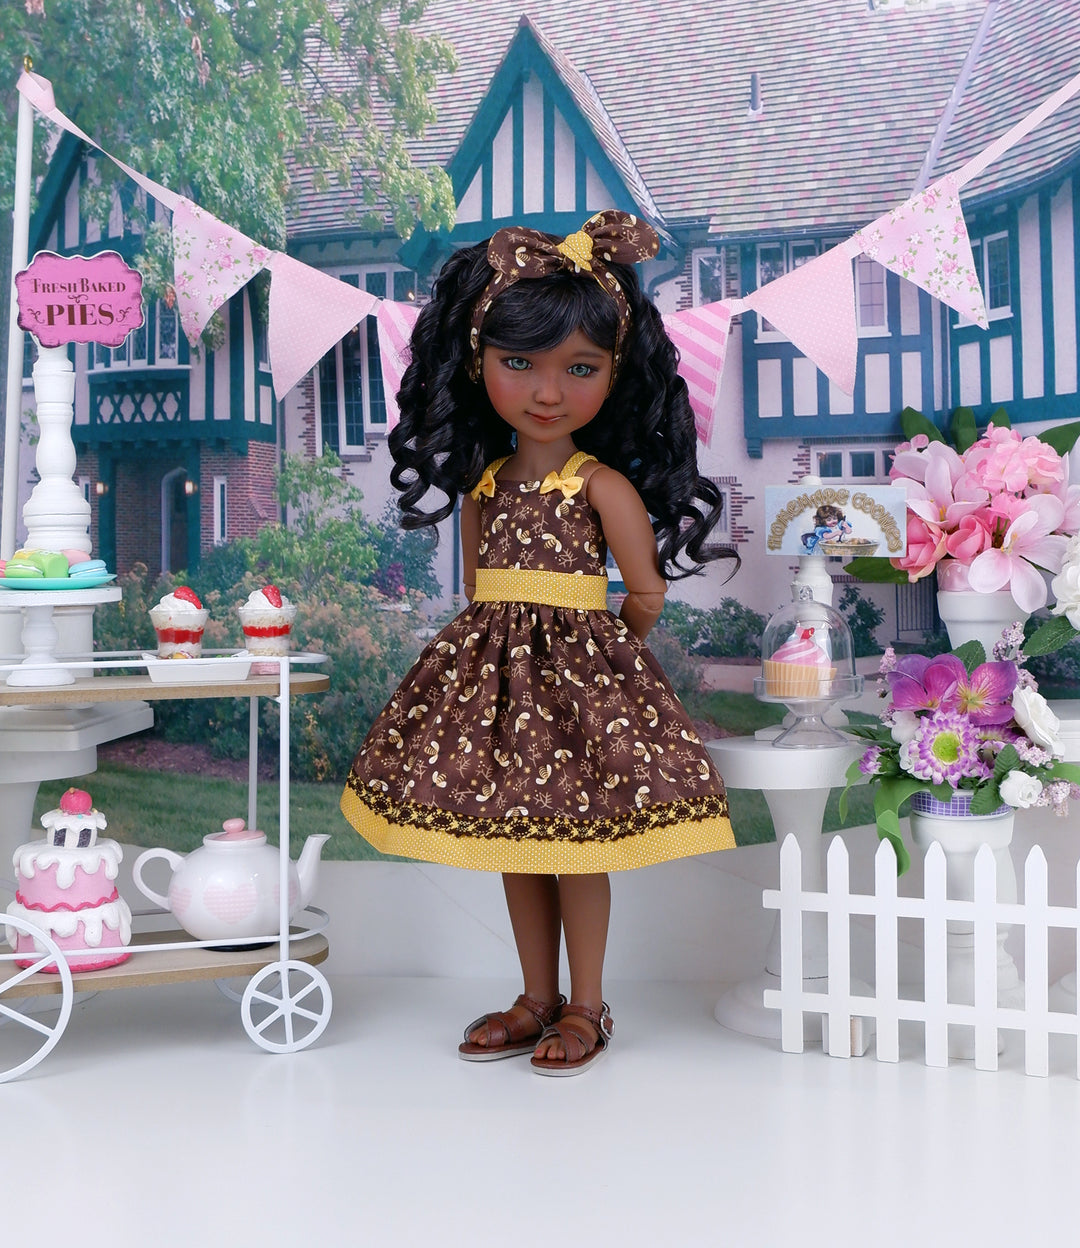 Chocolate & Honey - dress with sandals for Ruby Red Fashion Friends doll